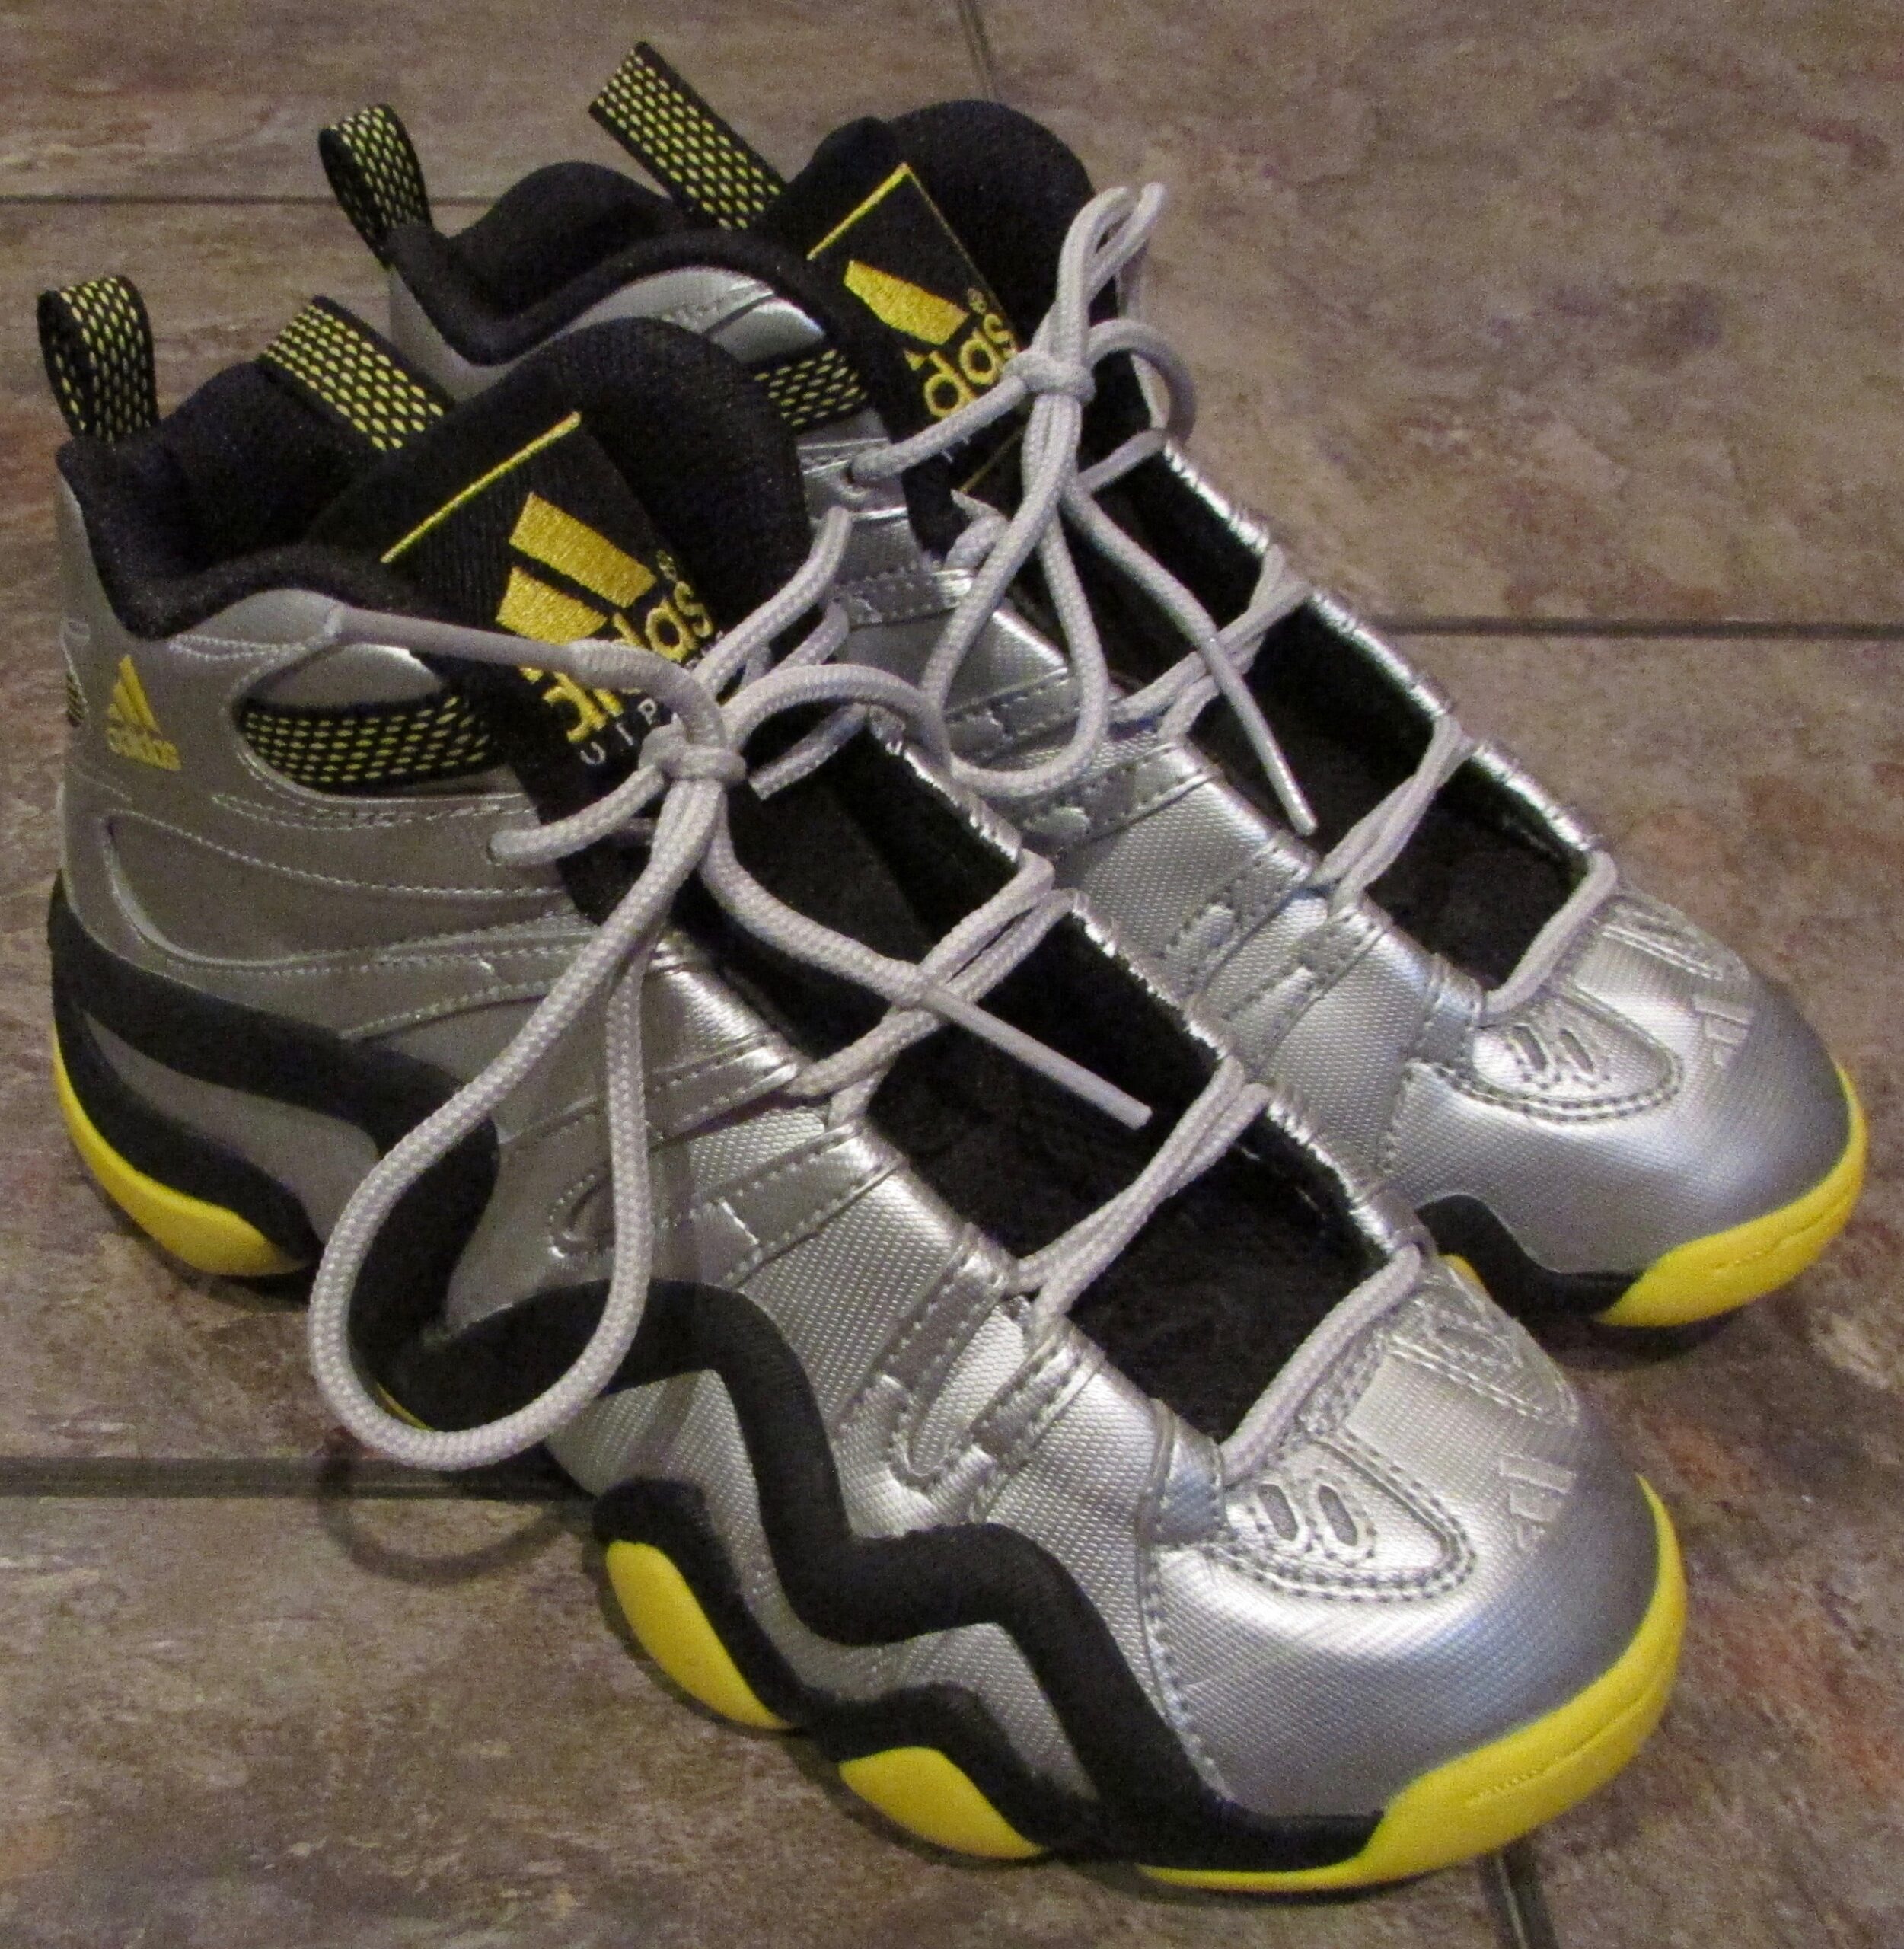 Adidas Boys Crazy 8 Basketball Shoes Sneakers Size 4.5Y - Heet On Your Feet